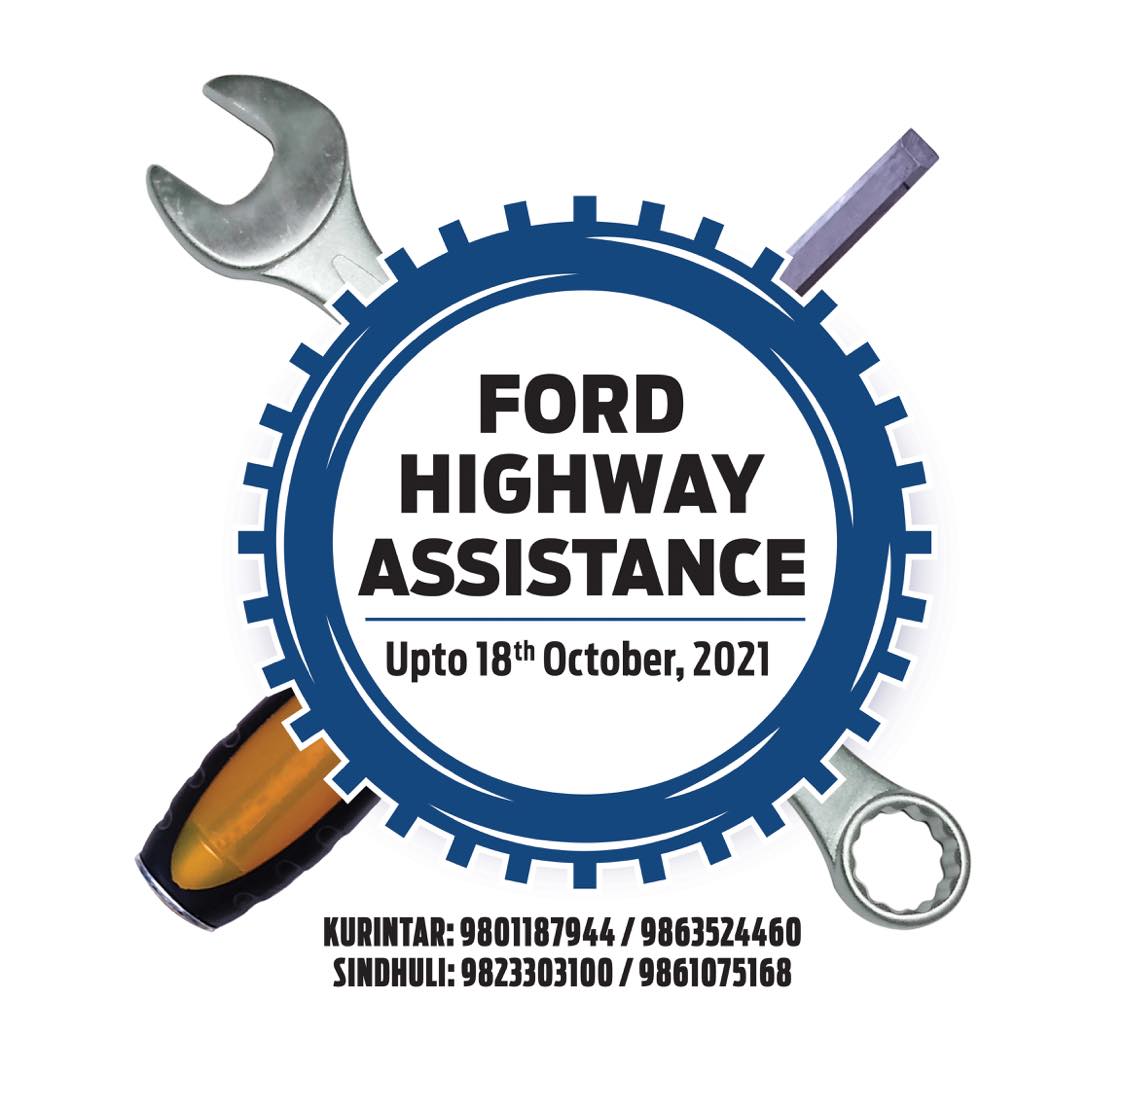 Ford Nepal announces roadside assistance campaign